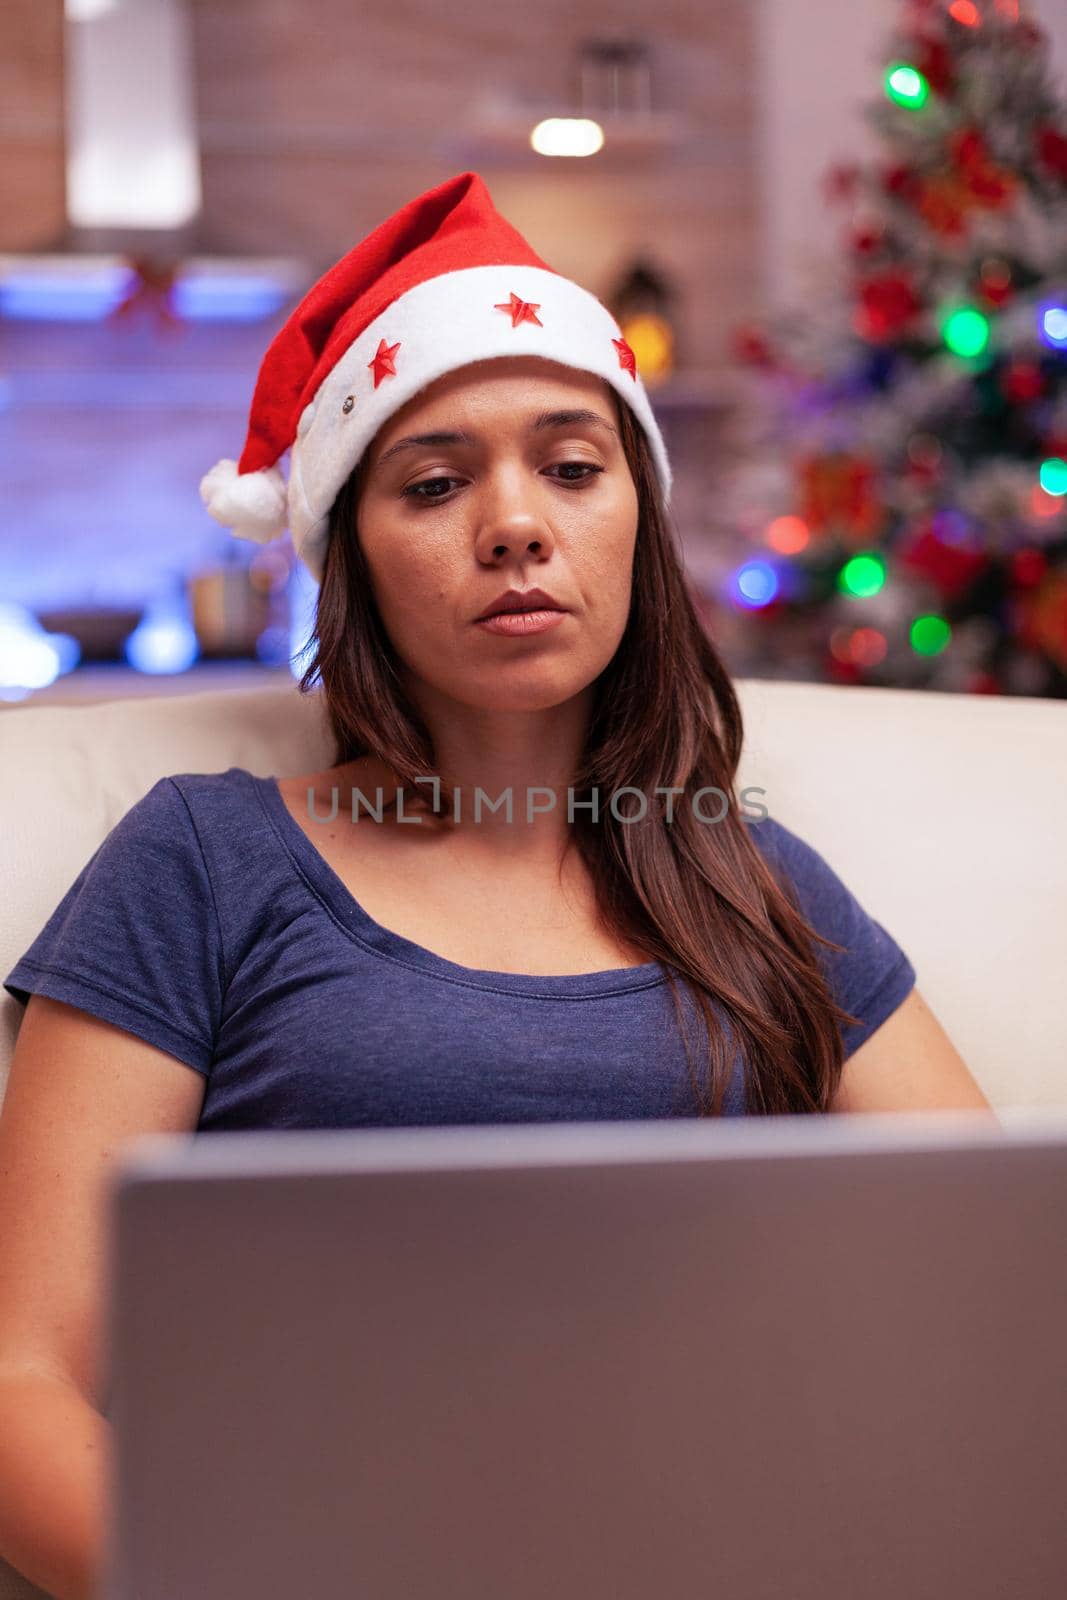 Girl reading business email on laptop computer working during christmastime sitting on couch in xmas decorated kitchen. Woman celebrating winter holiday enjoying christmas season